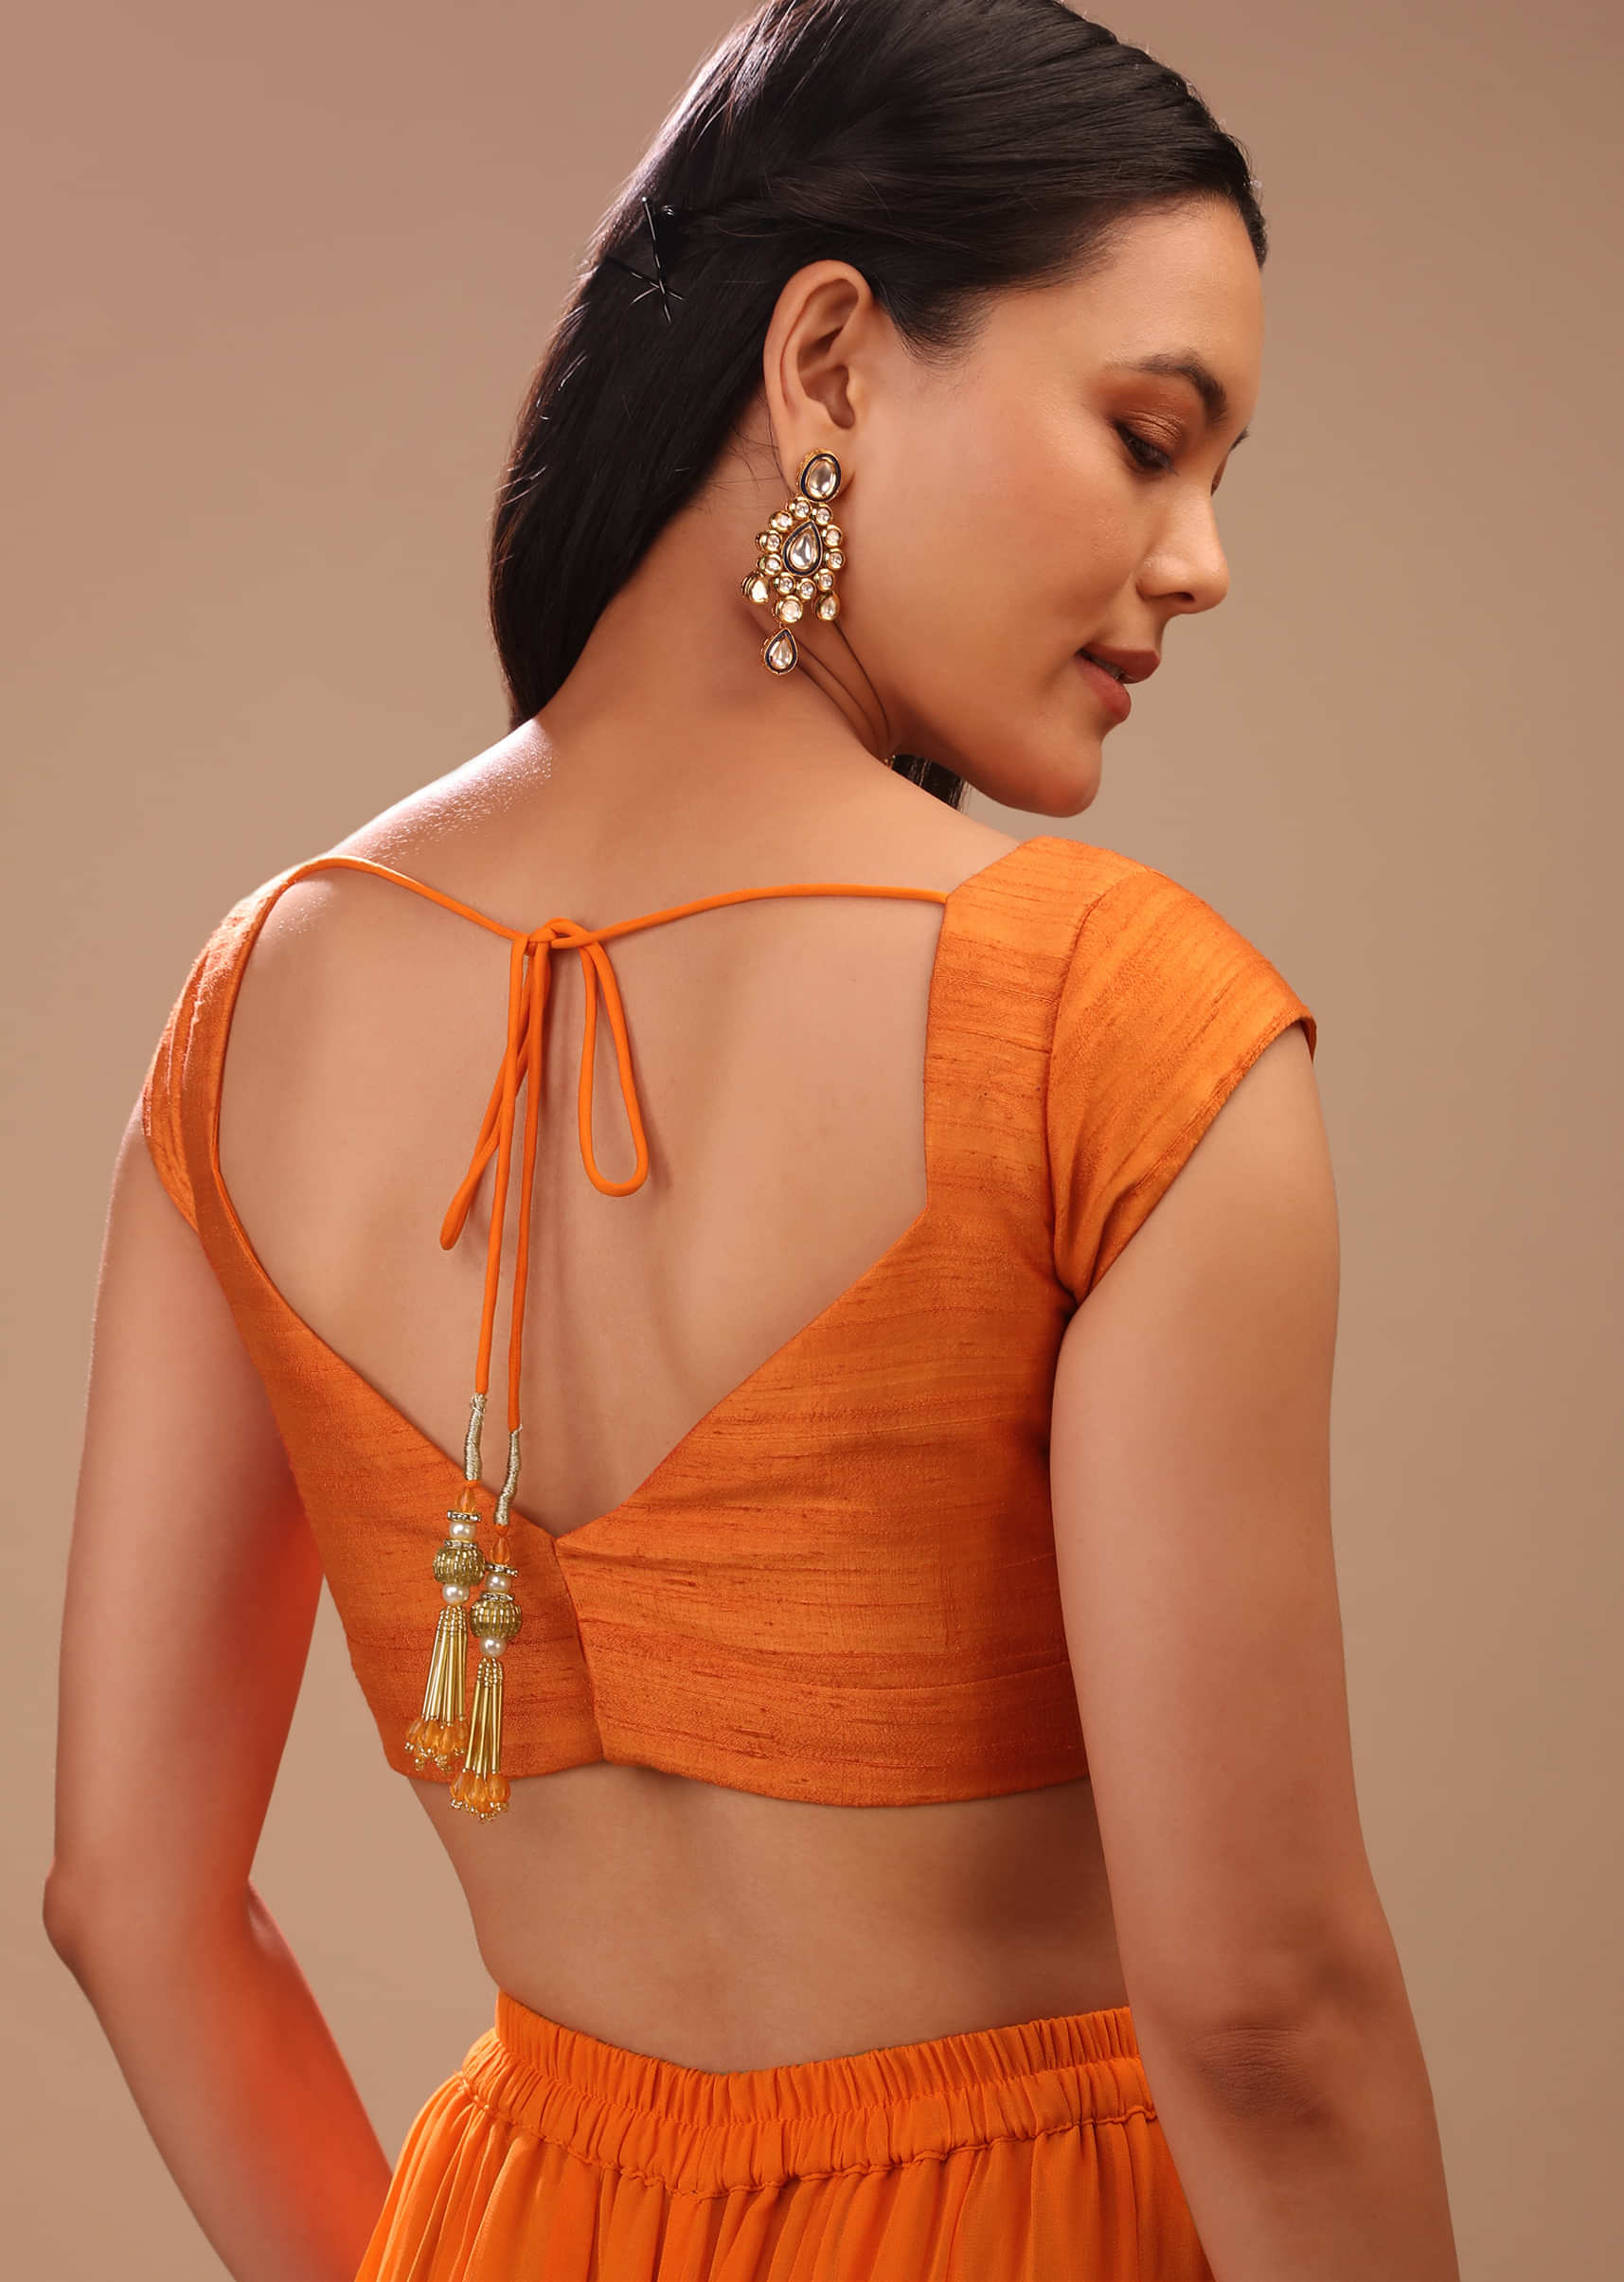 Russet Orange Blouse In Raw Silk With Sweetheart Neckline And Cap Sleeves